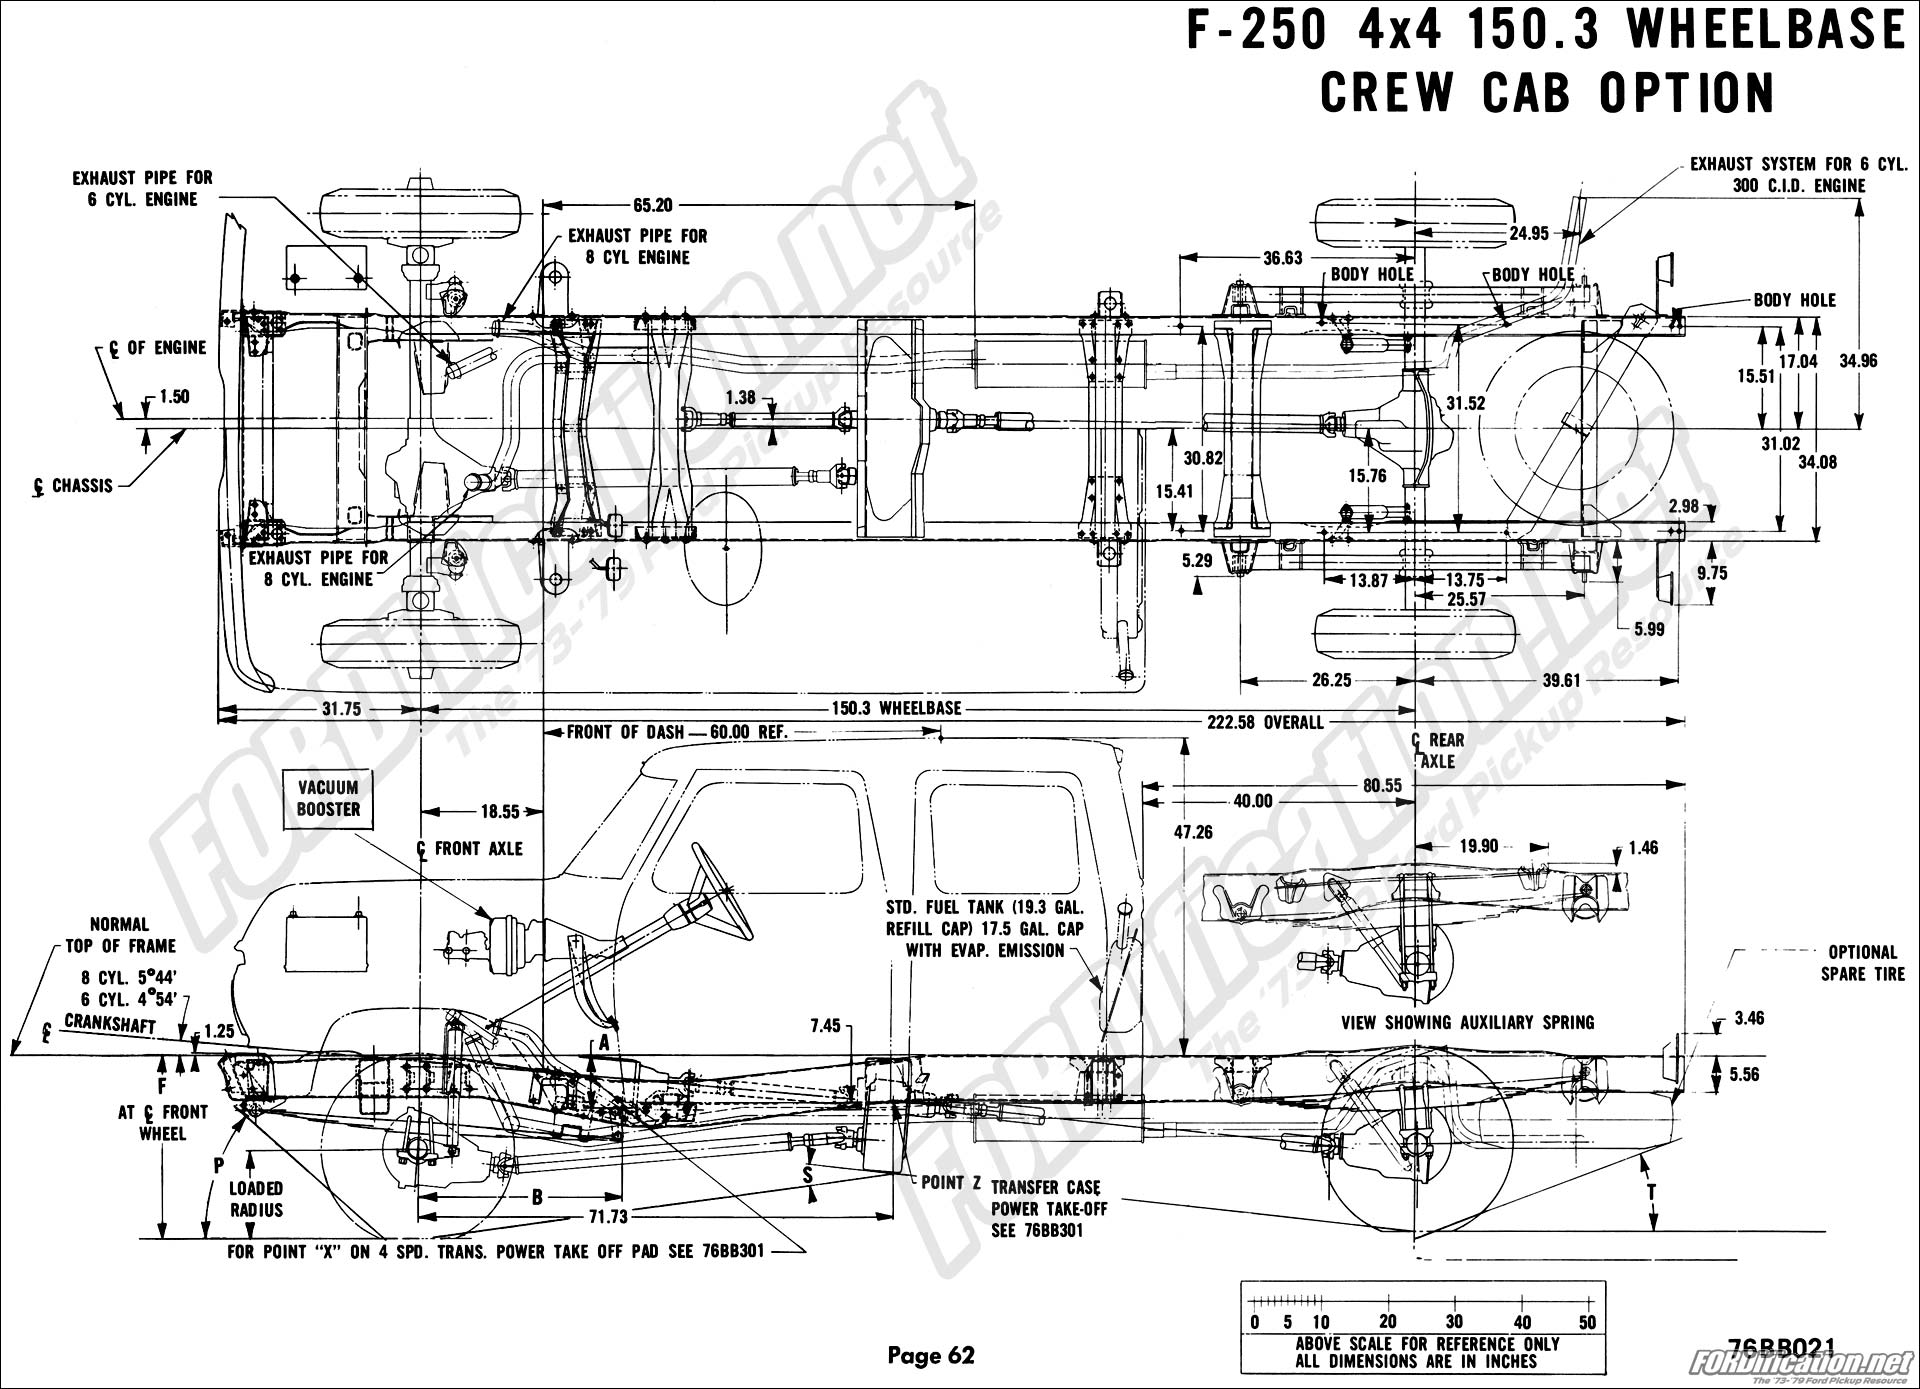 Ford body builders layout